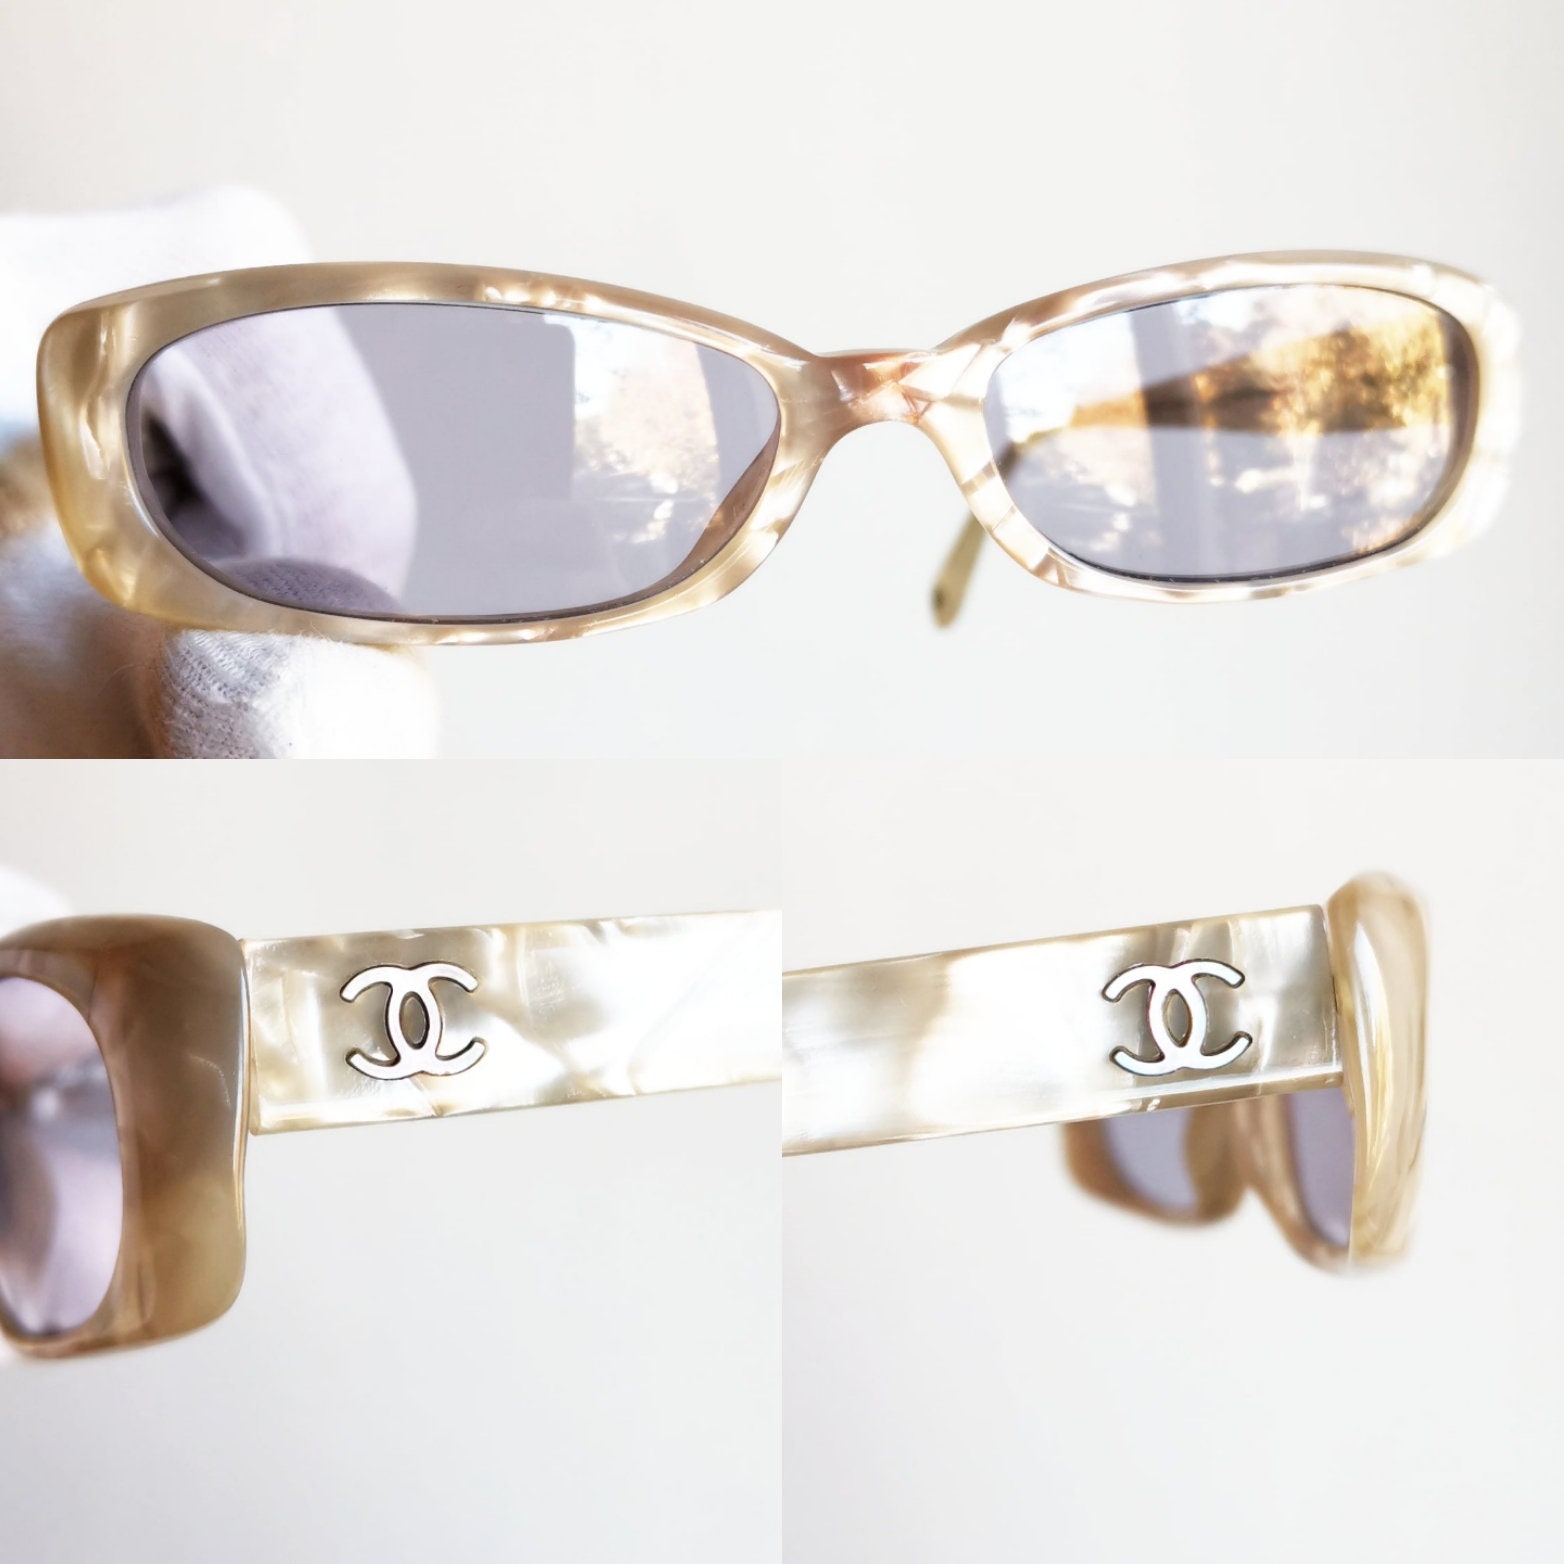 CHANEL Sunglasses Vintage Rare White Powder Pink Mother of 